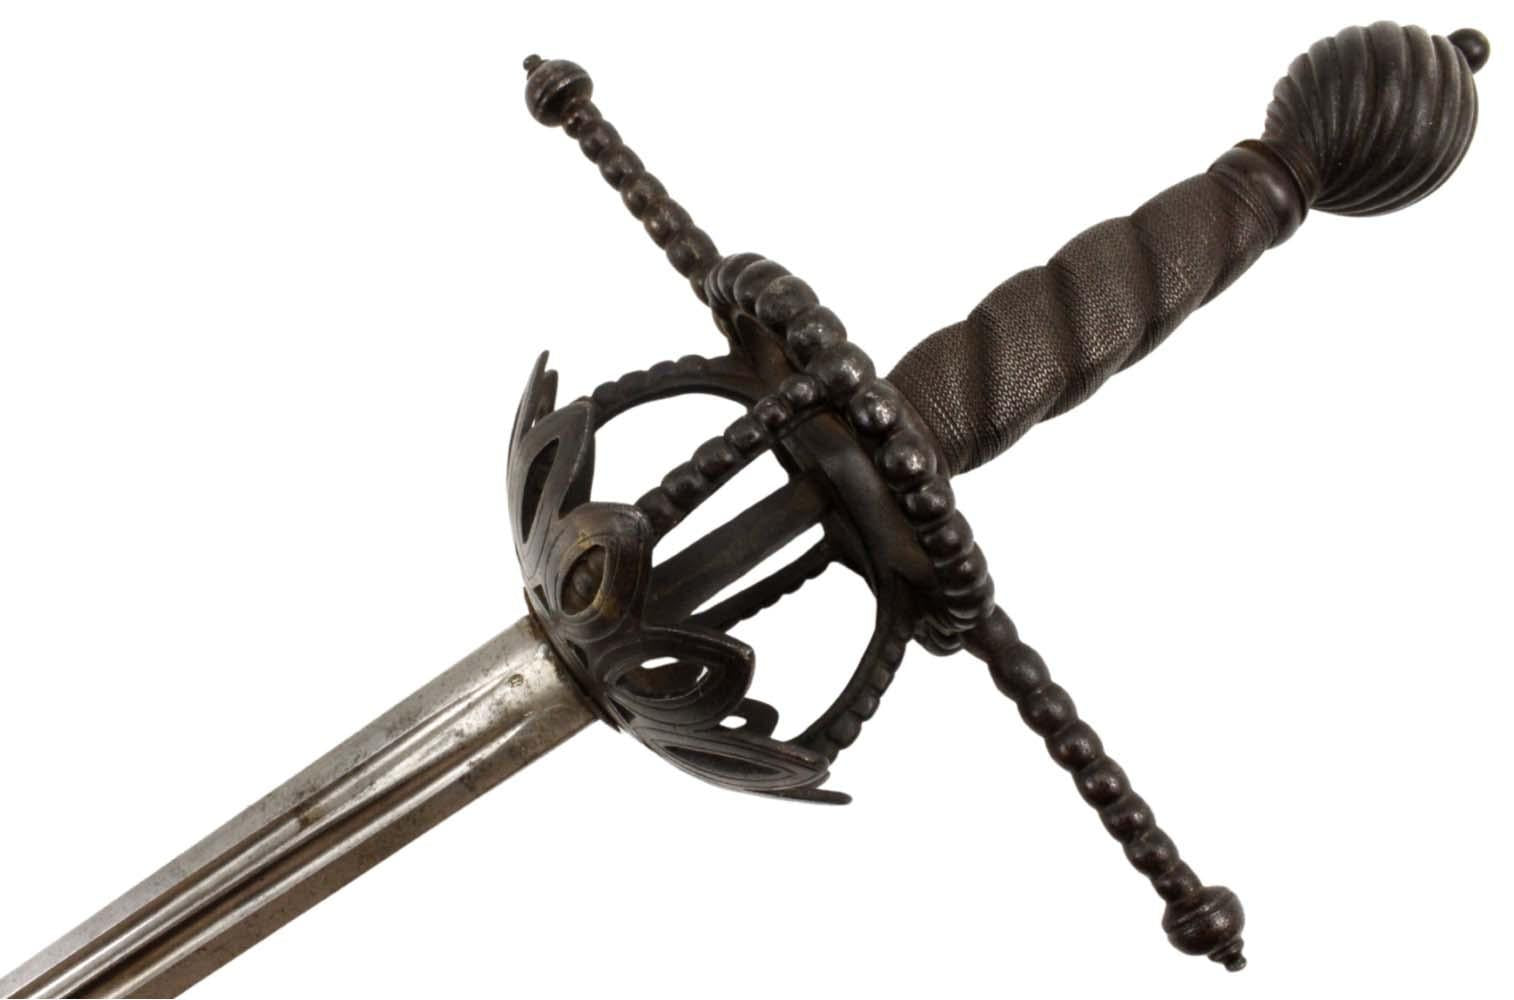 French Musketeer Type Rapier Sword with strong and maker marked double-fullered blade and distinctive iron hilt pattern